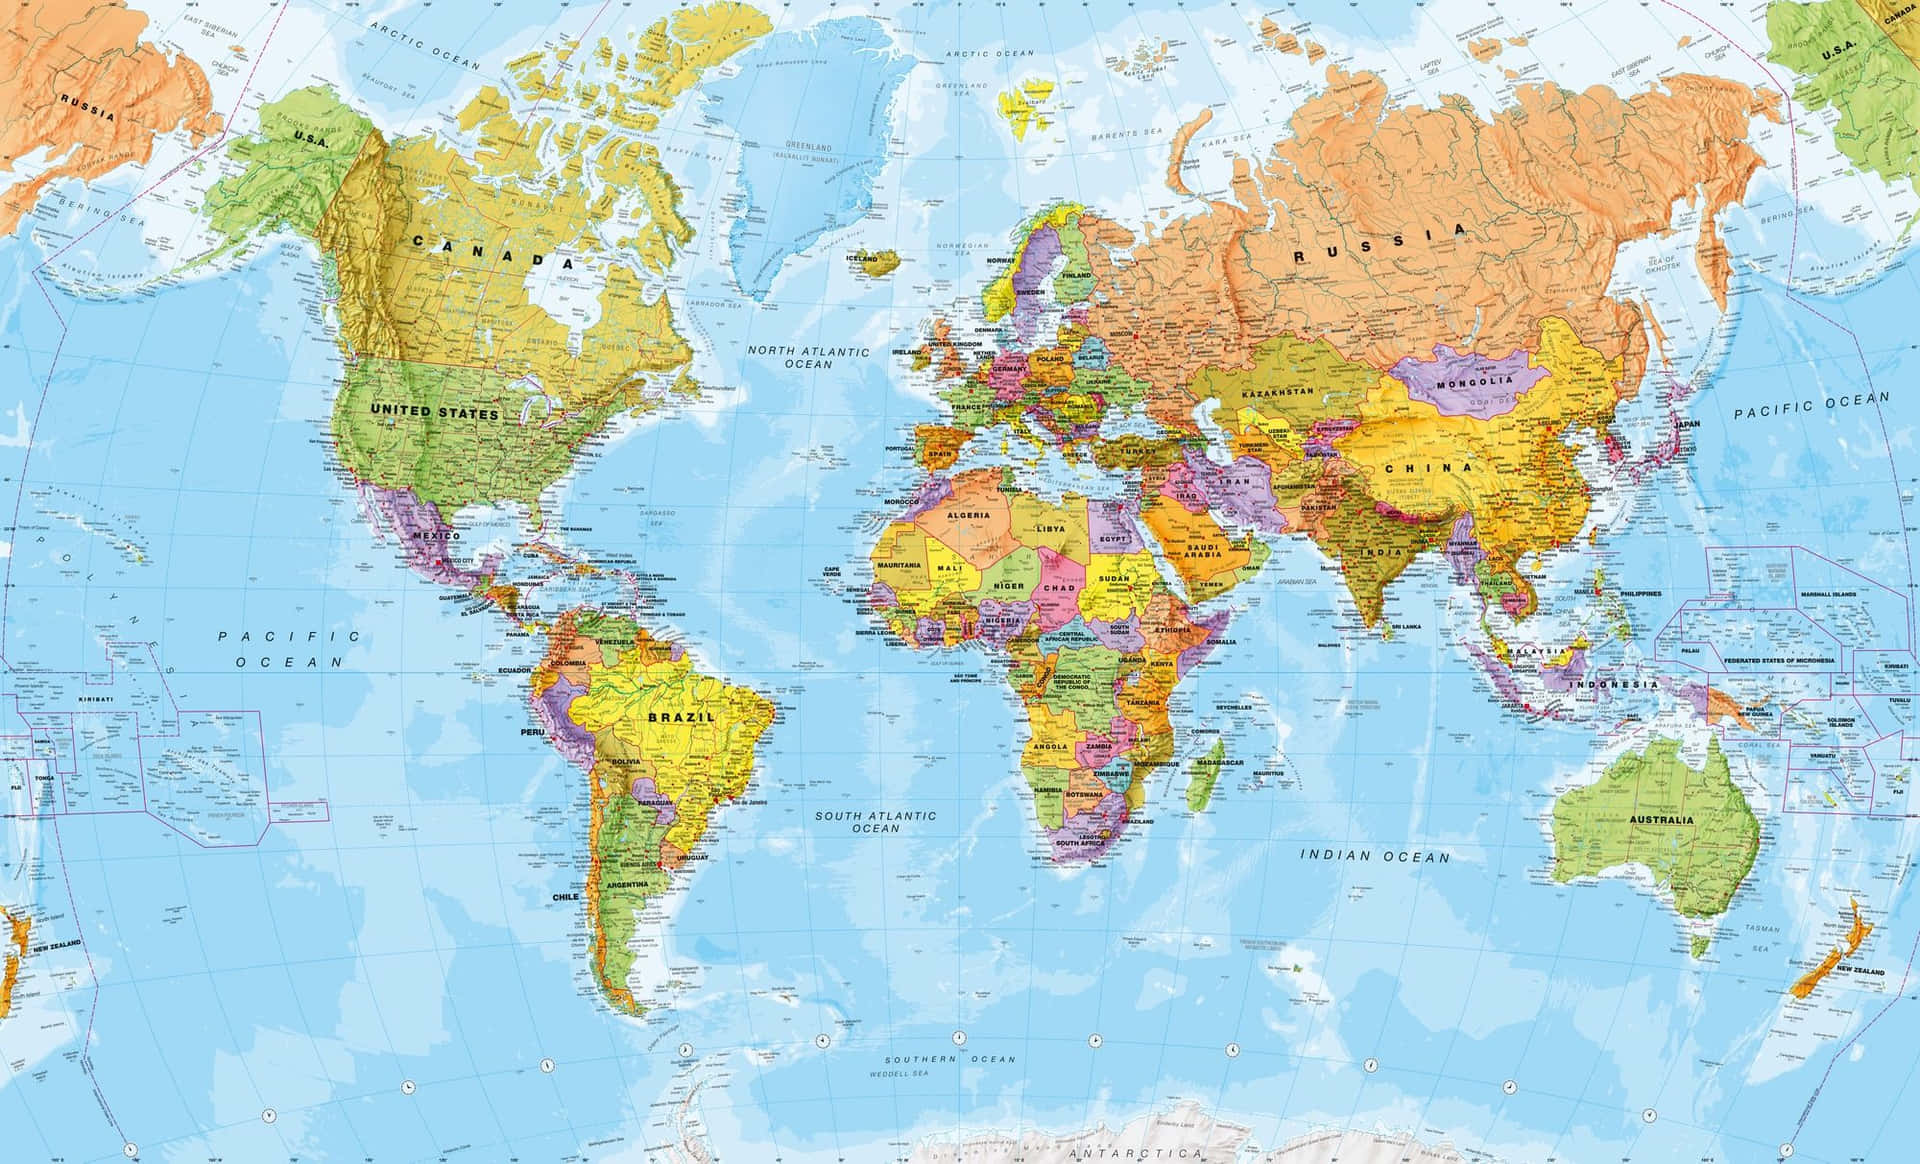 A world map showing countries, oceans, and continents